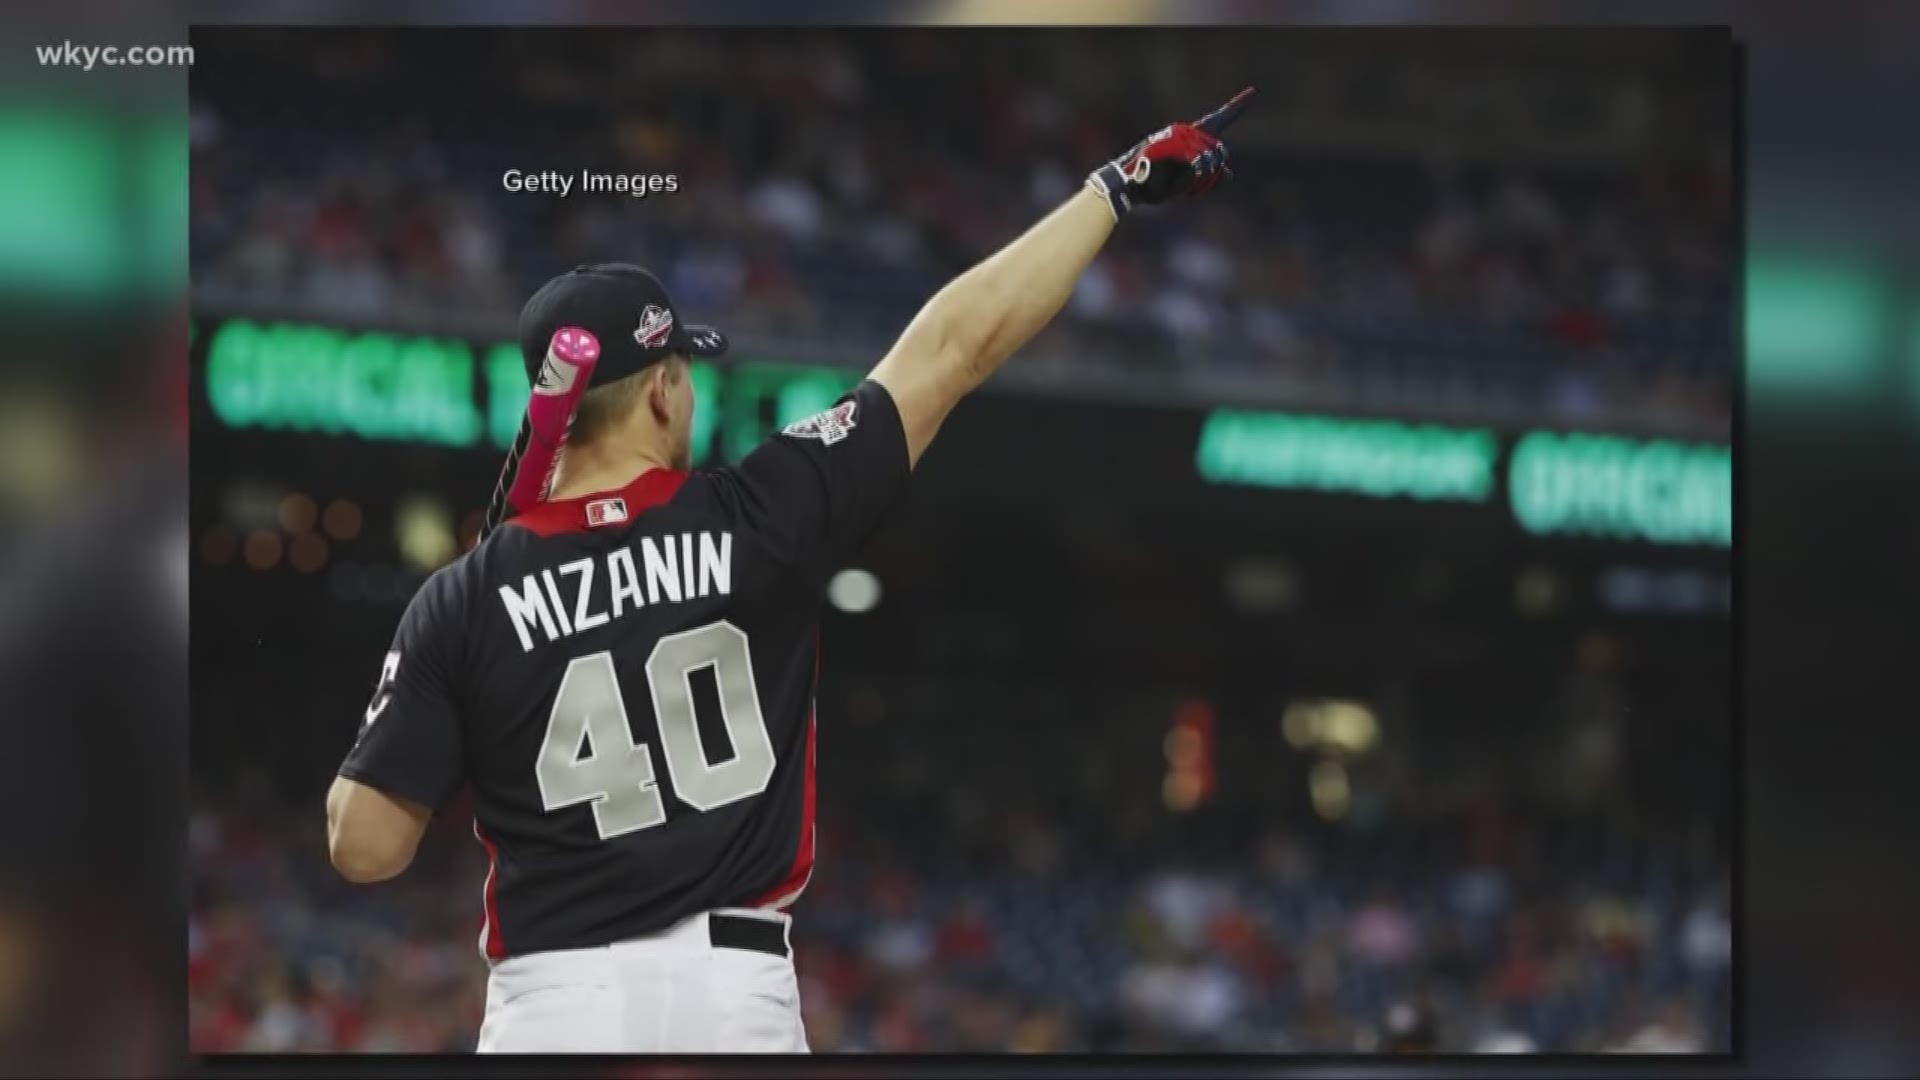 Wwe Superstar The Miz To Represent Cleveland Indians In Mlb Celebrity Softball Game Wkyc Com